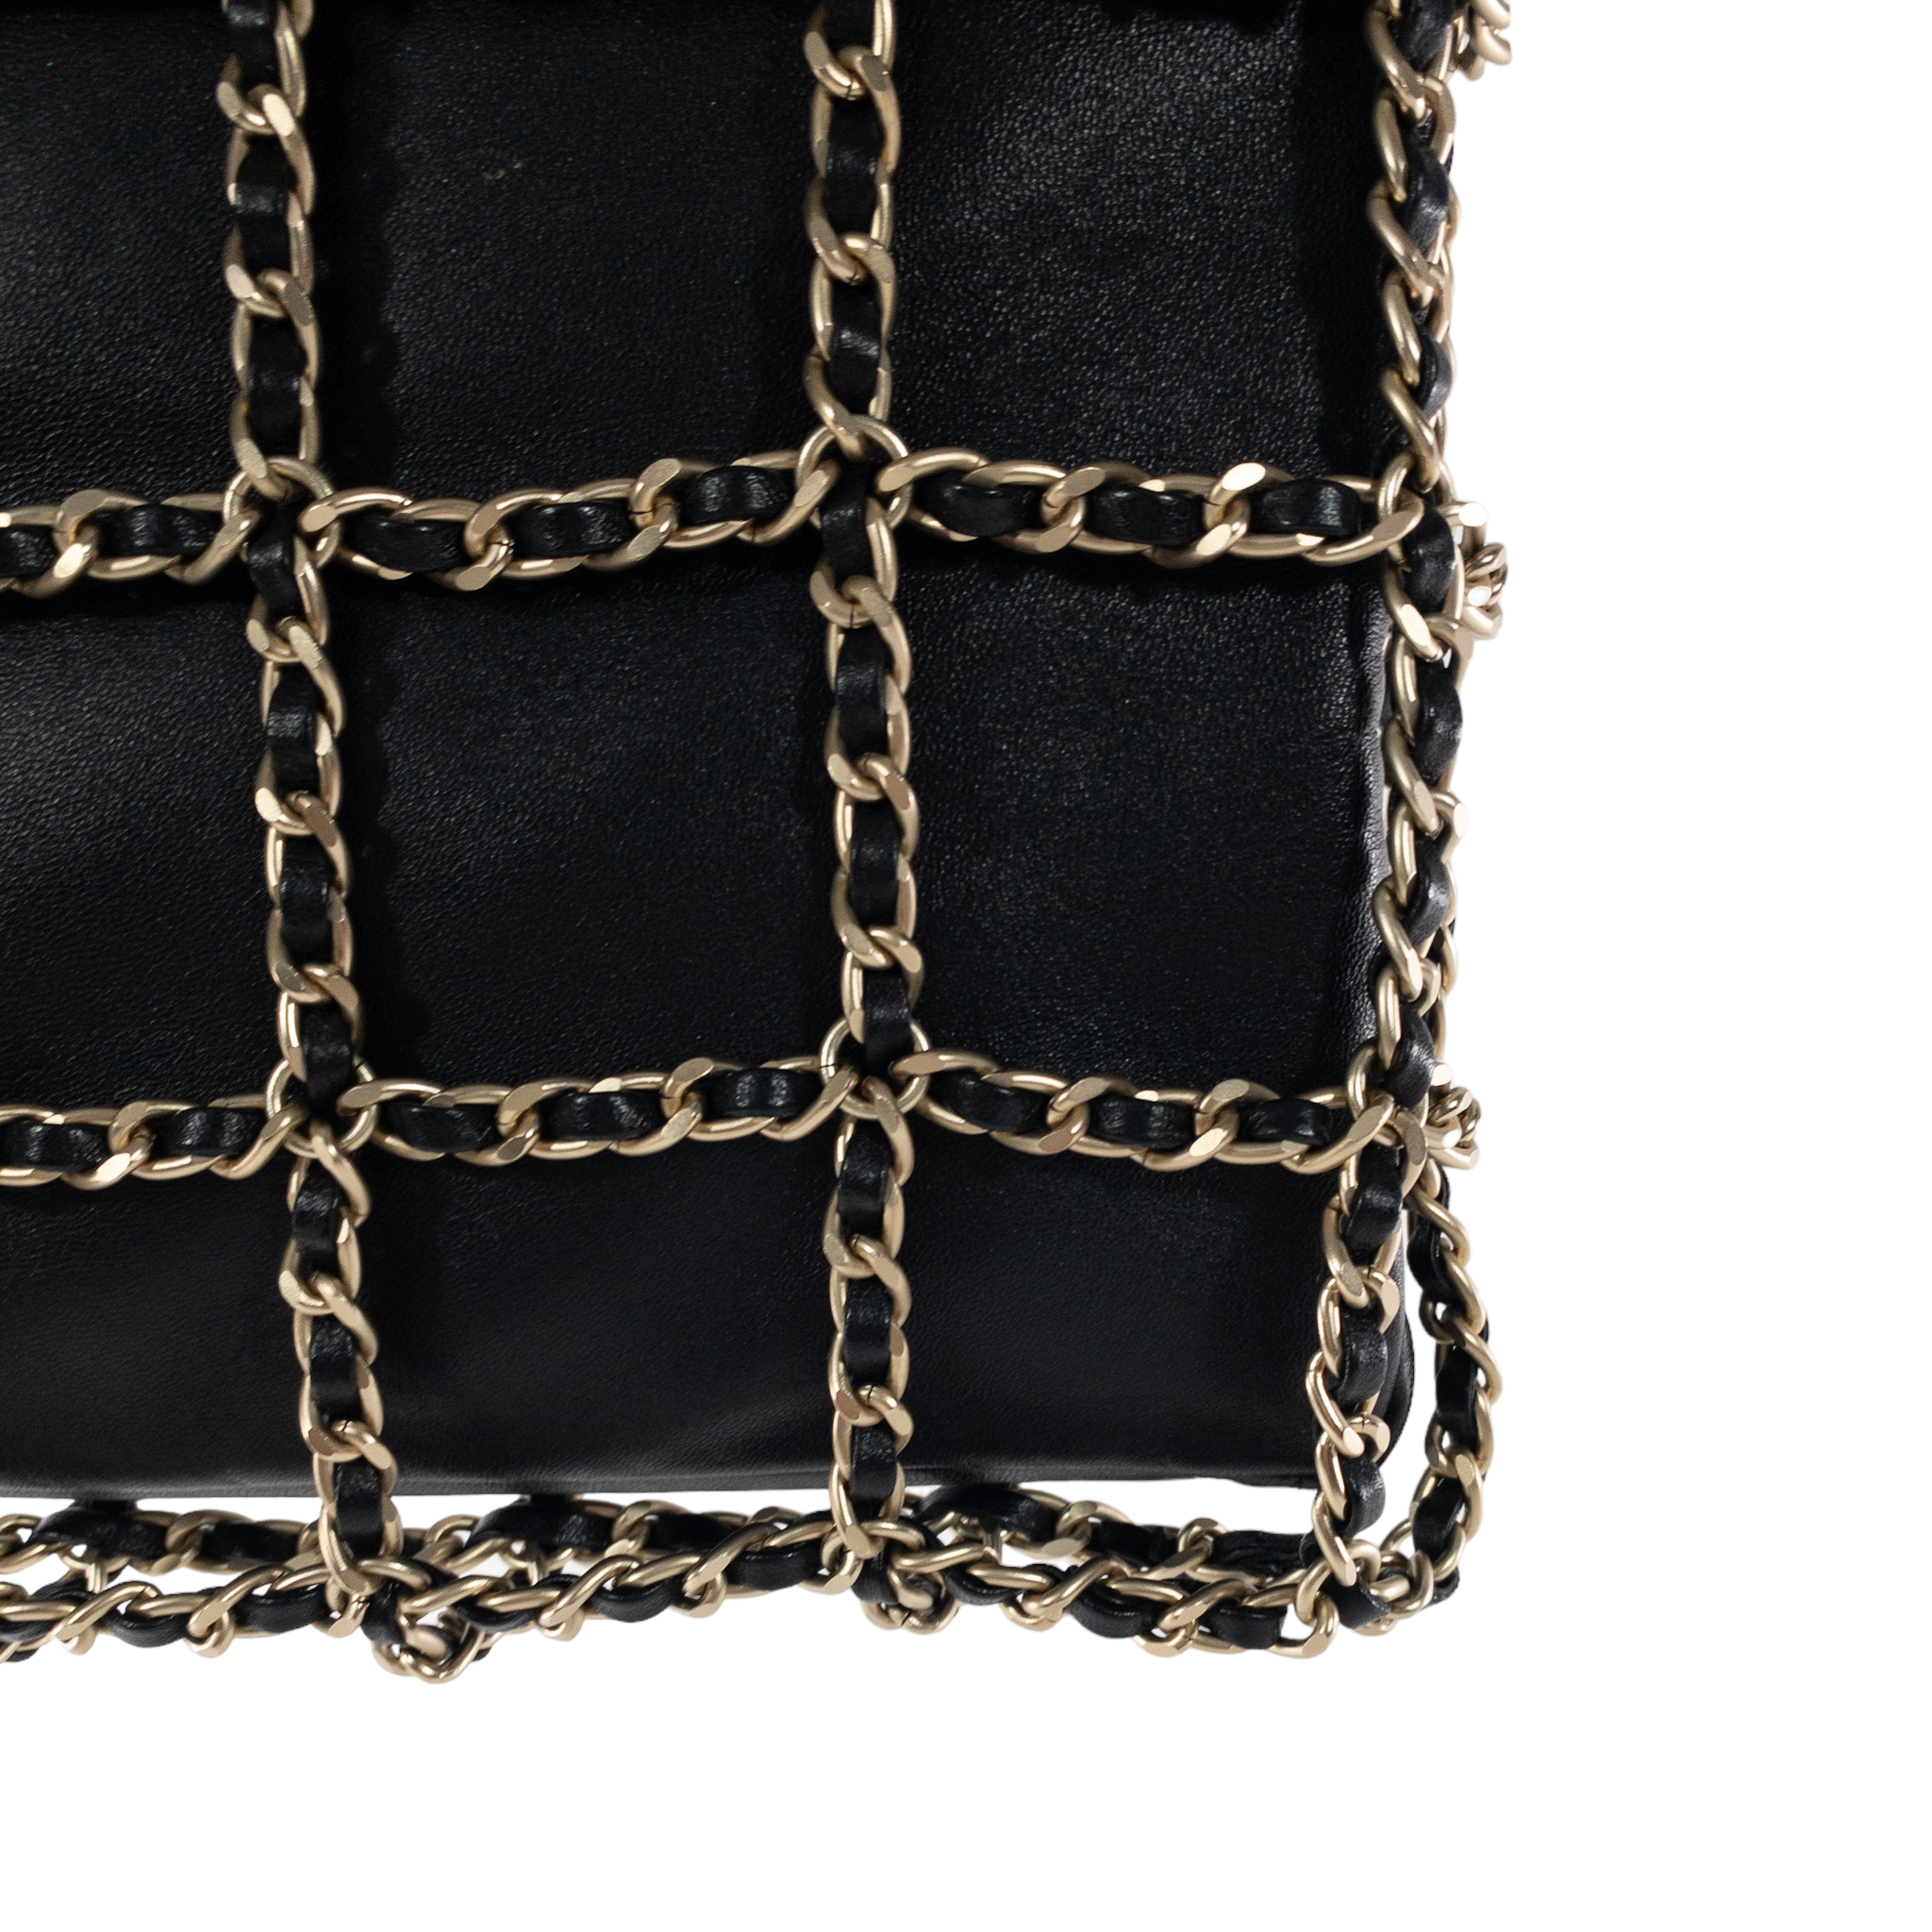 Chanel Woven Chain Frame Shopping Tote